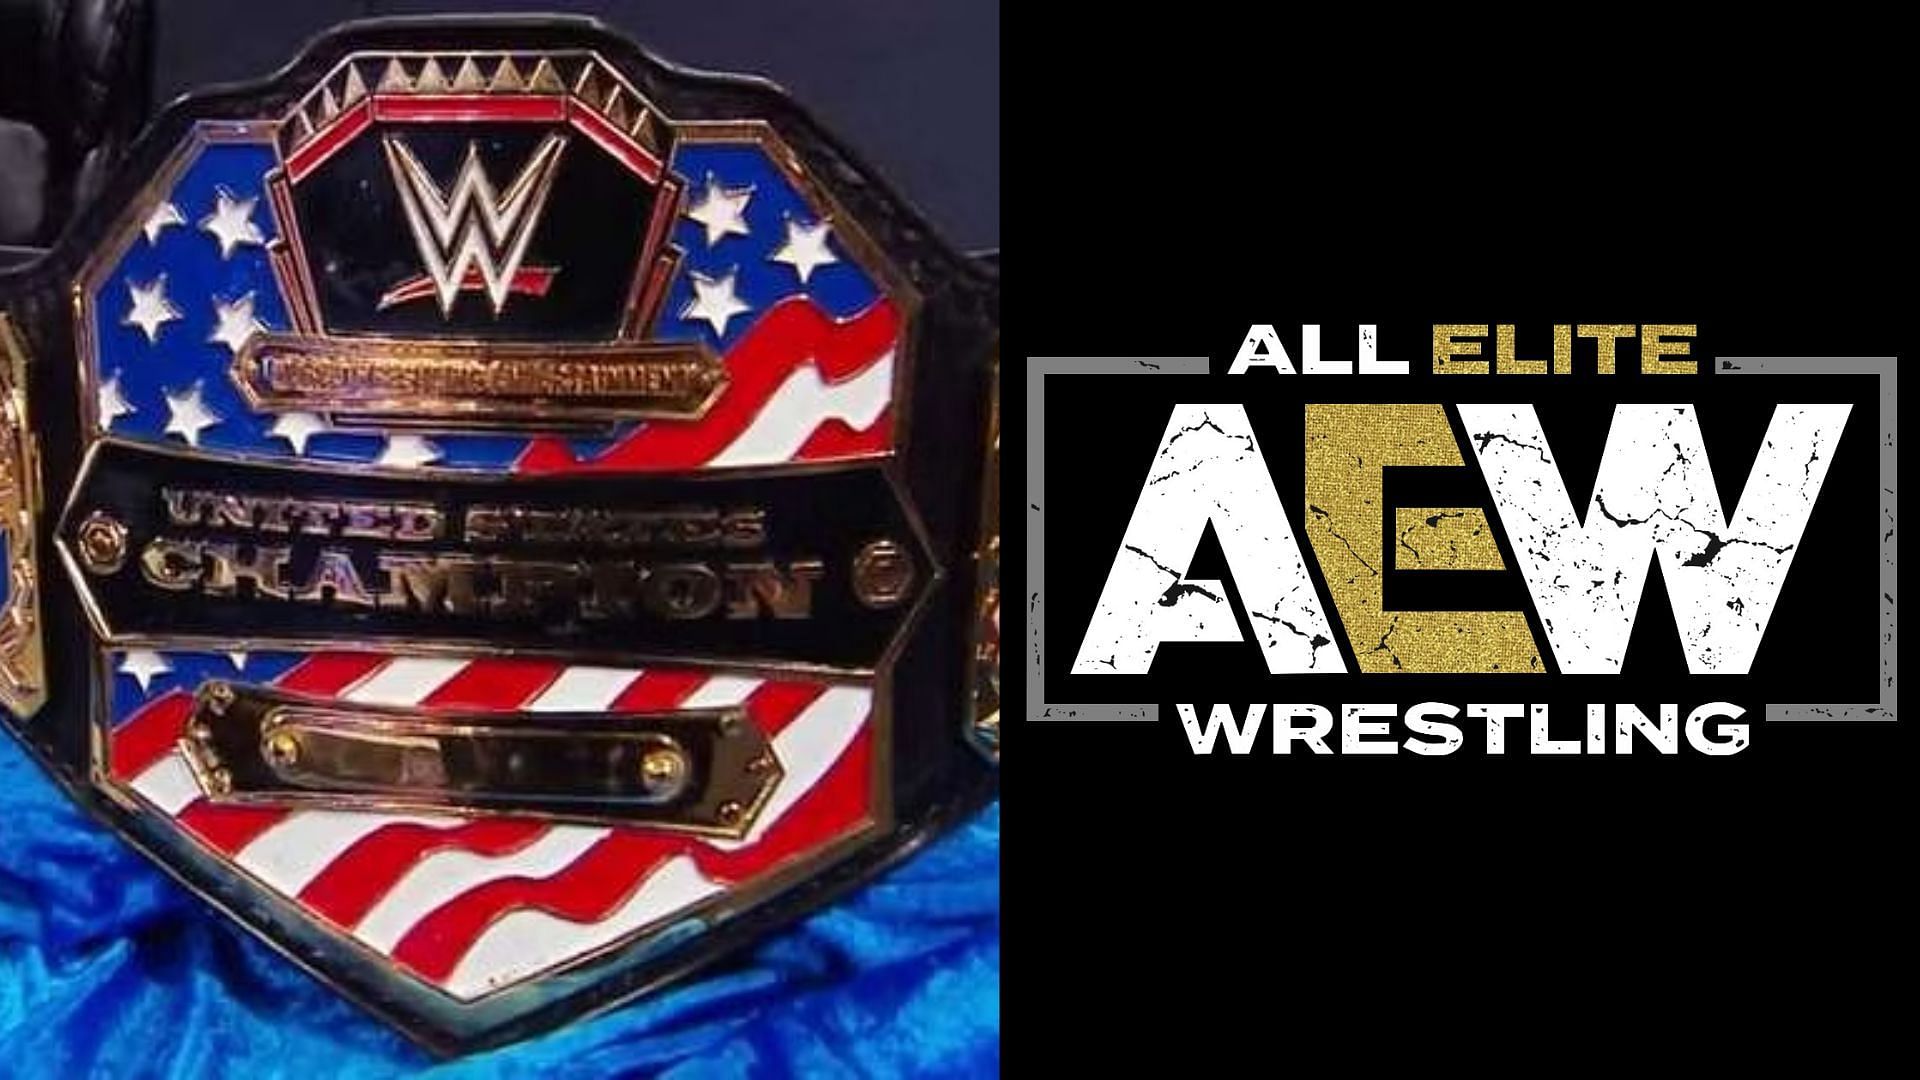 WWE United States Title (left), AEW logo (right)